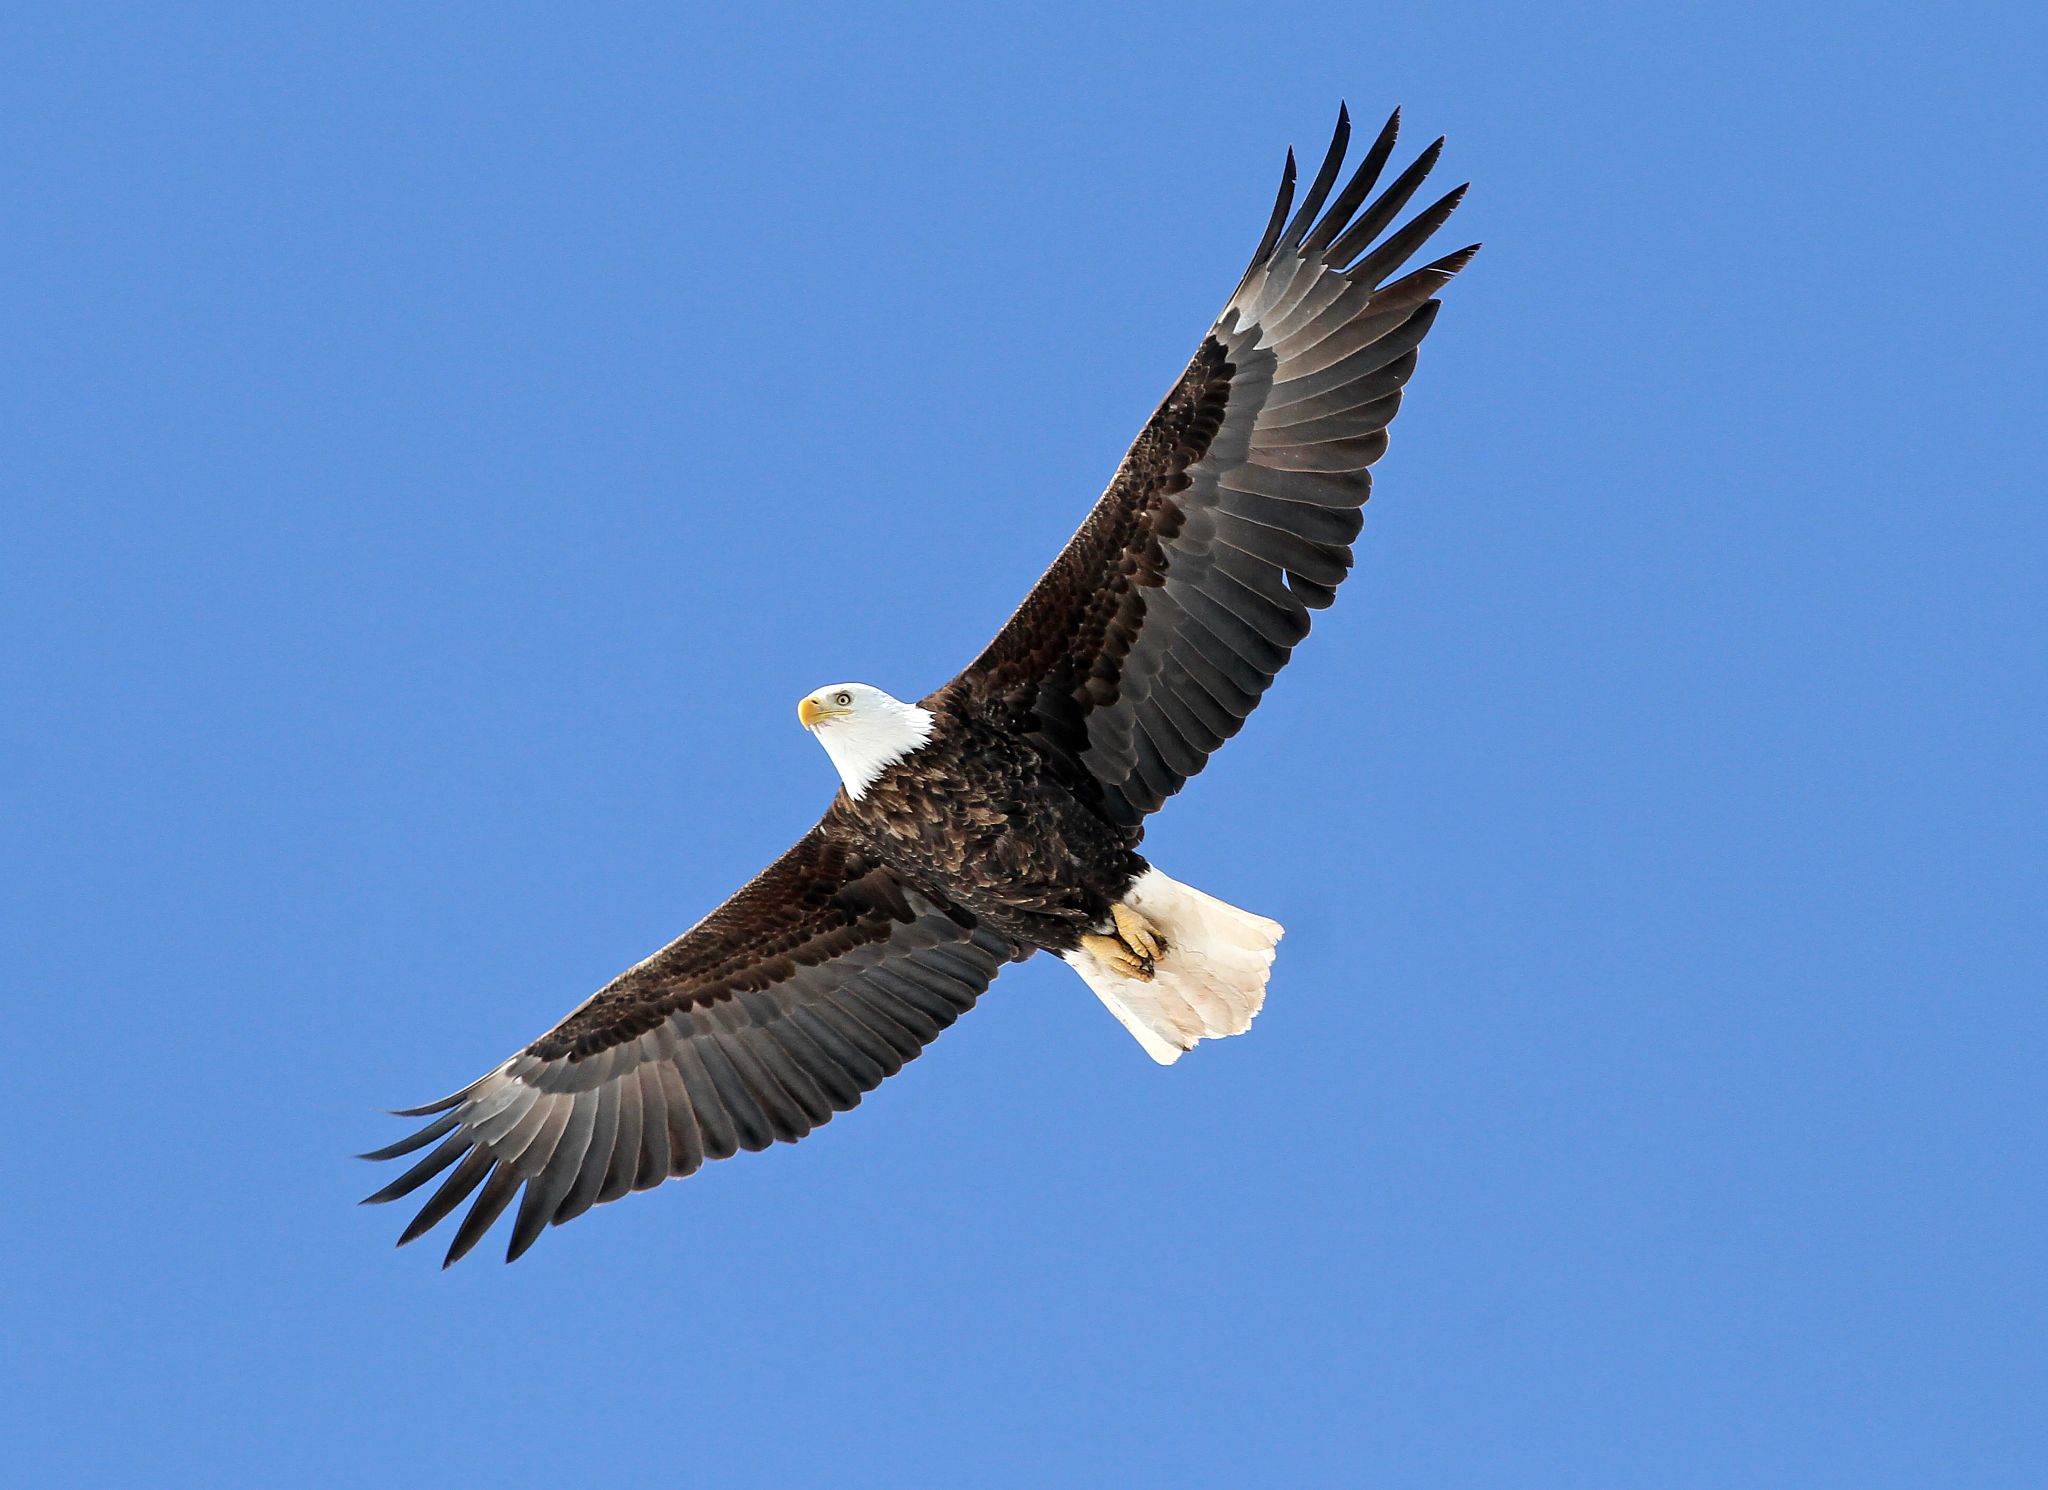 A bald eagle soars in a clear blue sky.